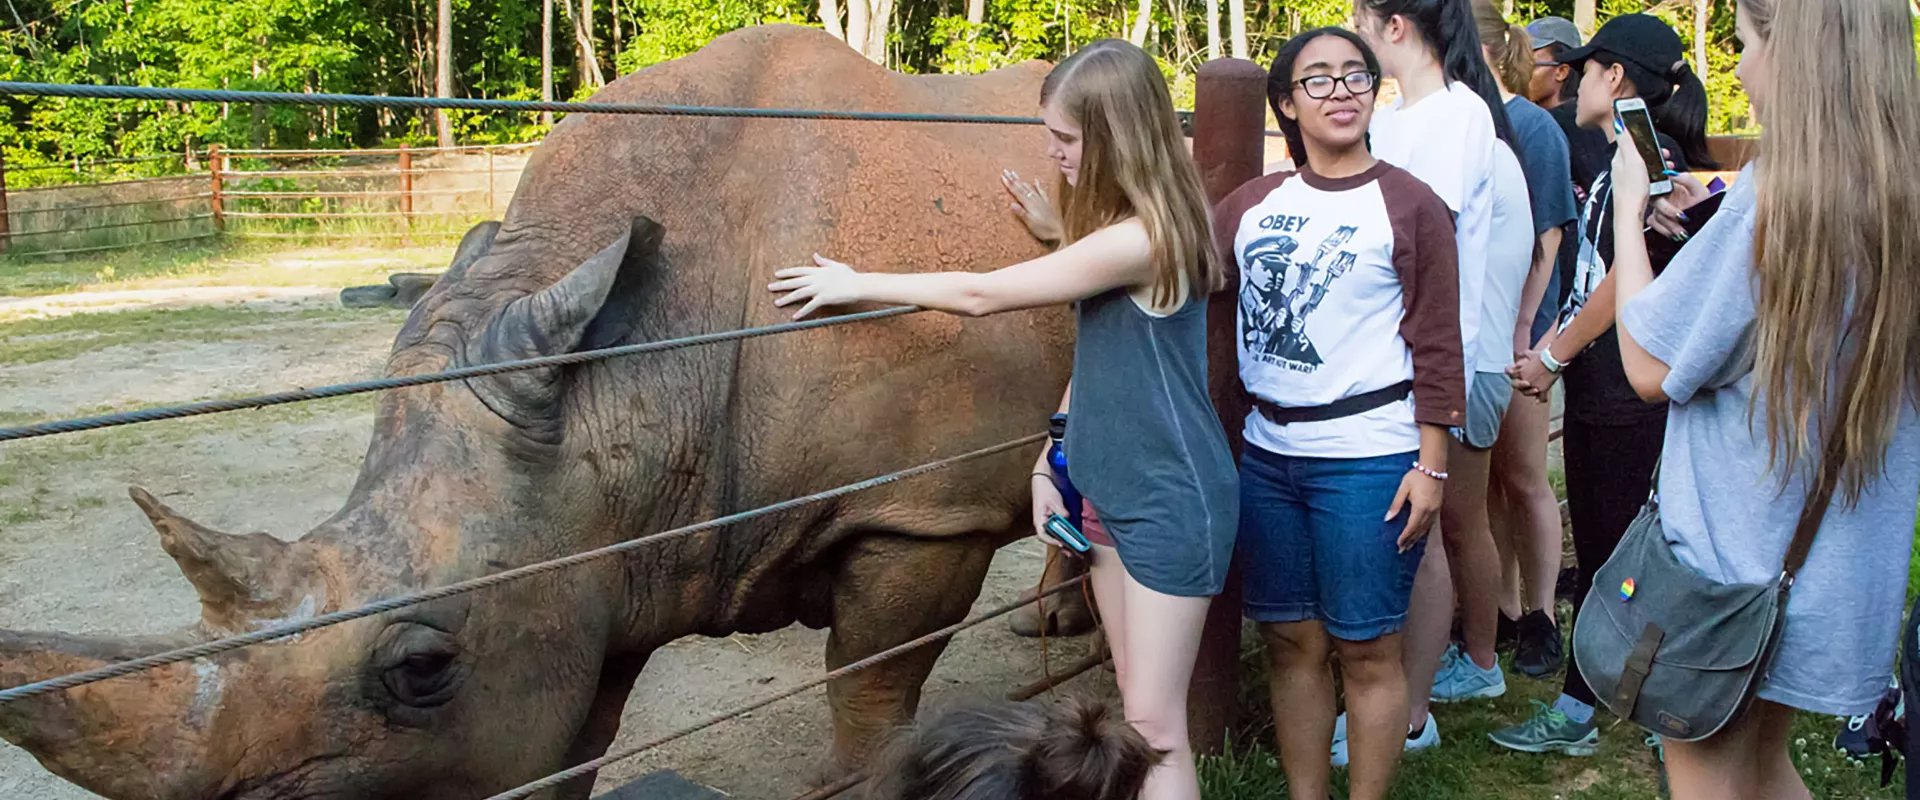 Zoo Tours: Family Activities for All